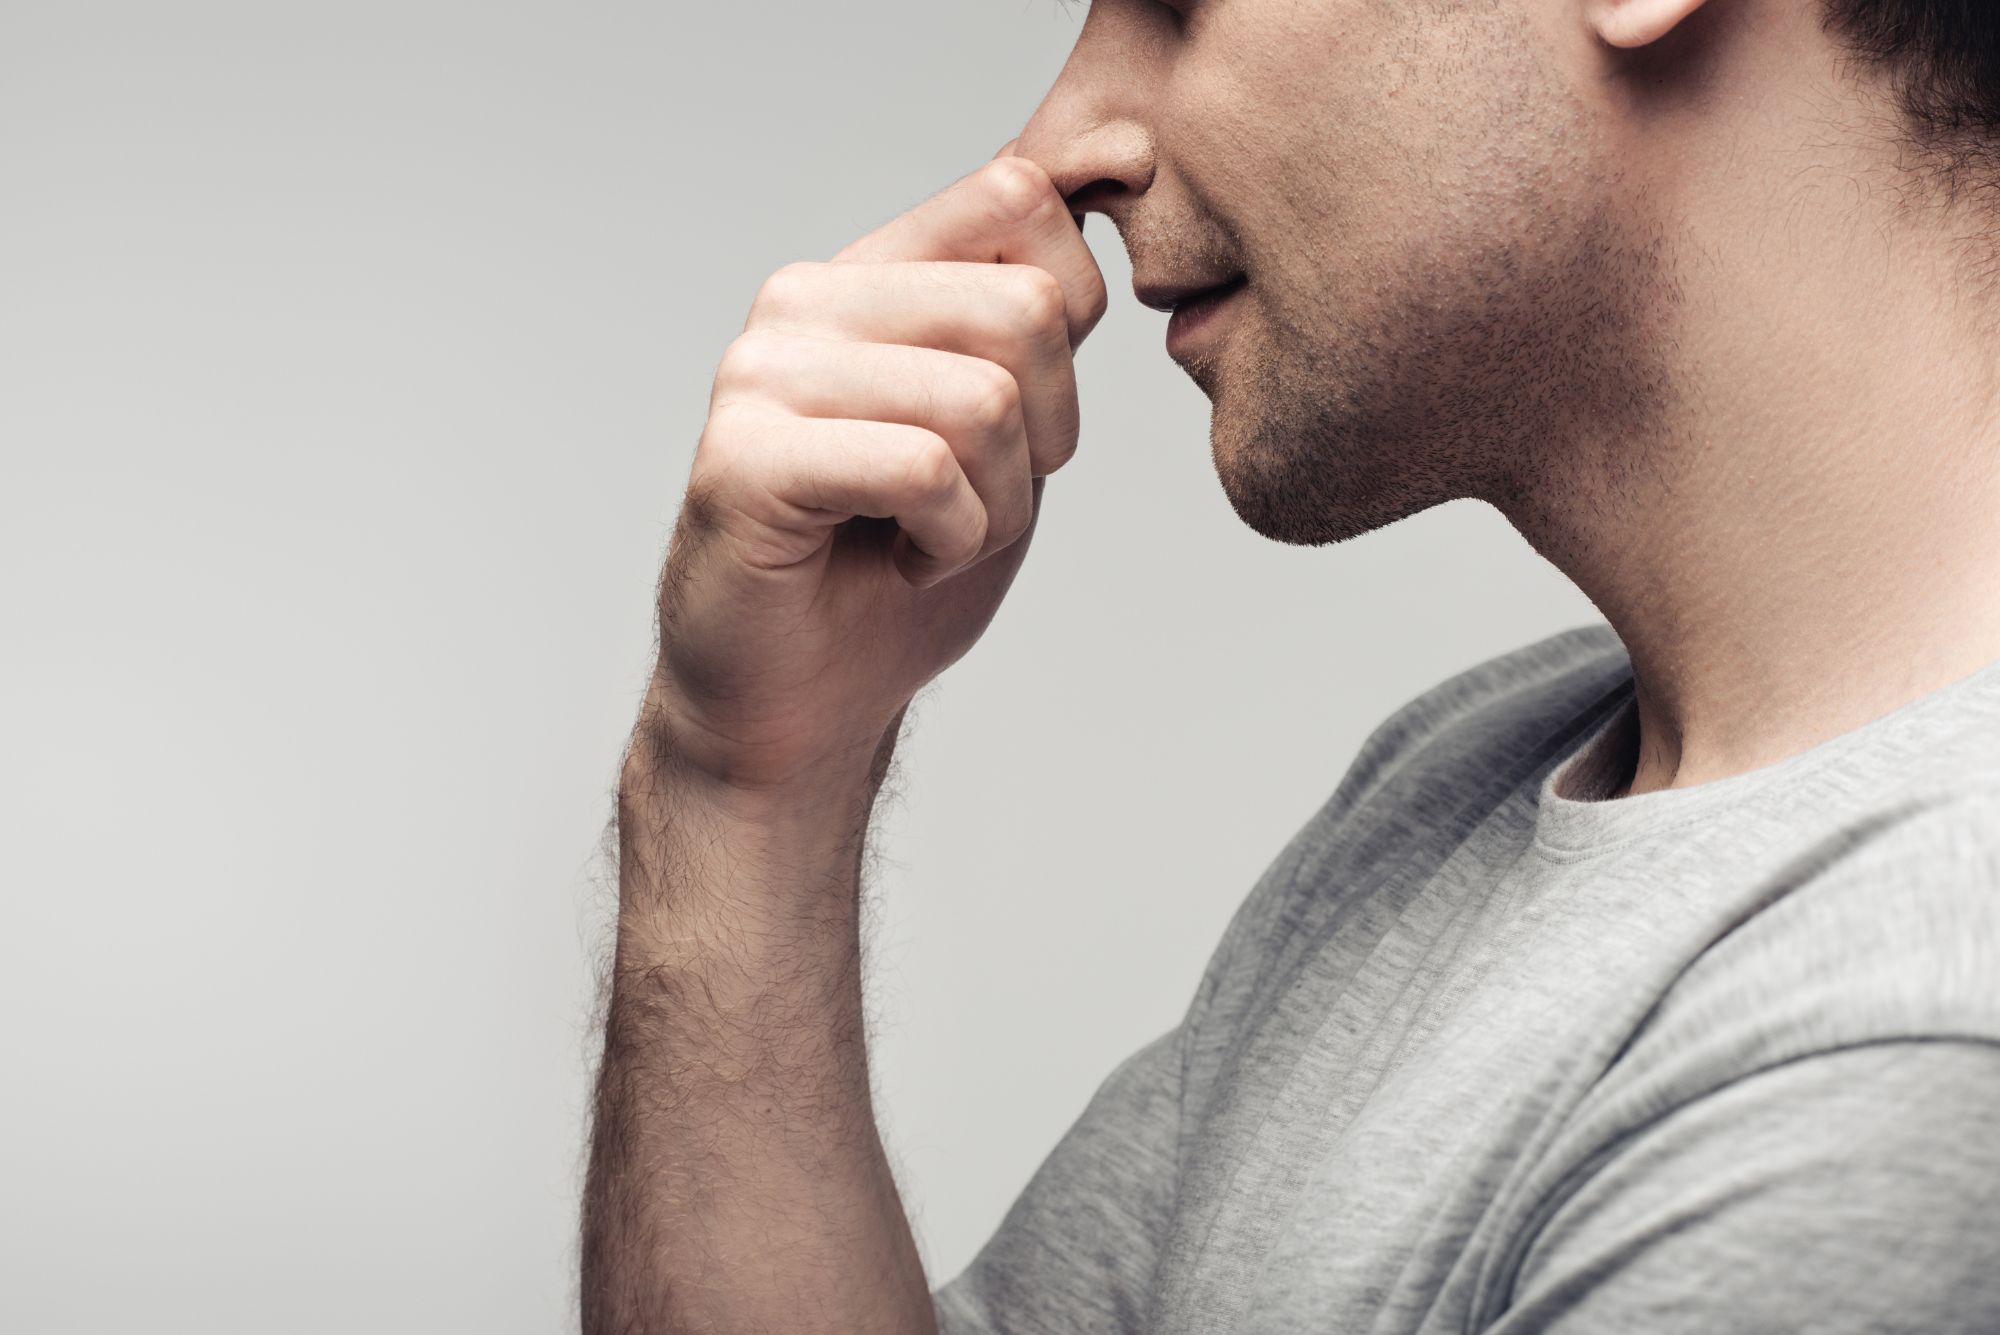 A man wearing a grey shirt holds his nose, which is stuffy due to swollen turbinates.